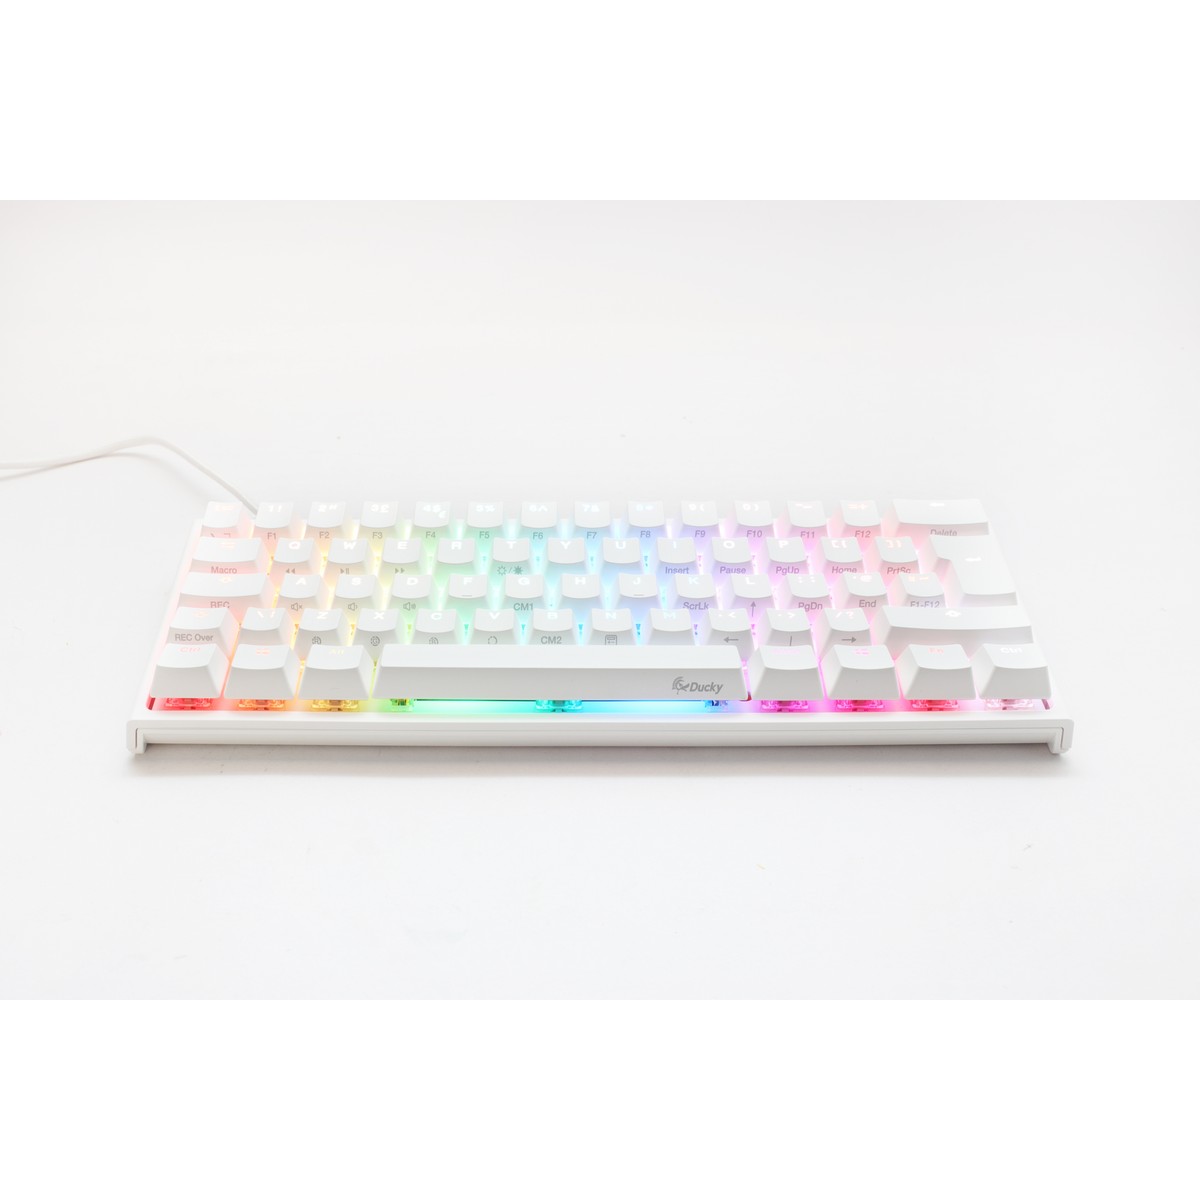 Ducky One2 Pro Mini 60% Mechanical Gaming Keyboard MX Cherry Silent Red  Switch White Frame - UK Layout